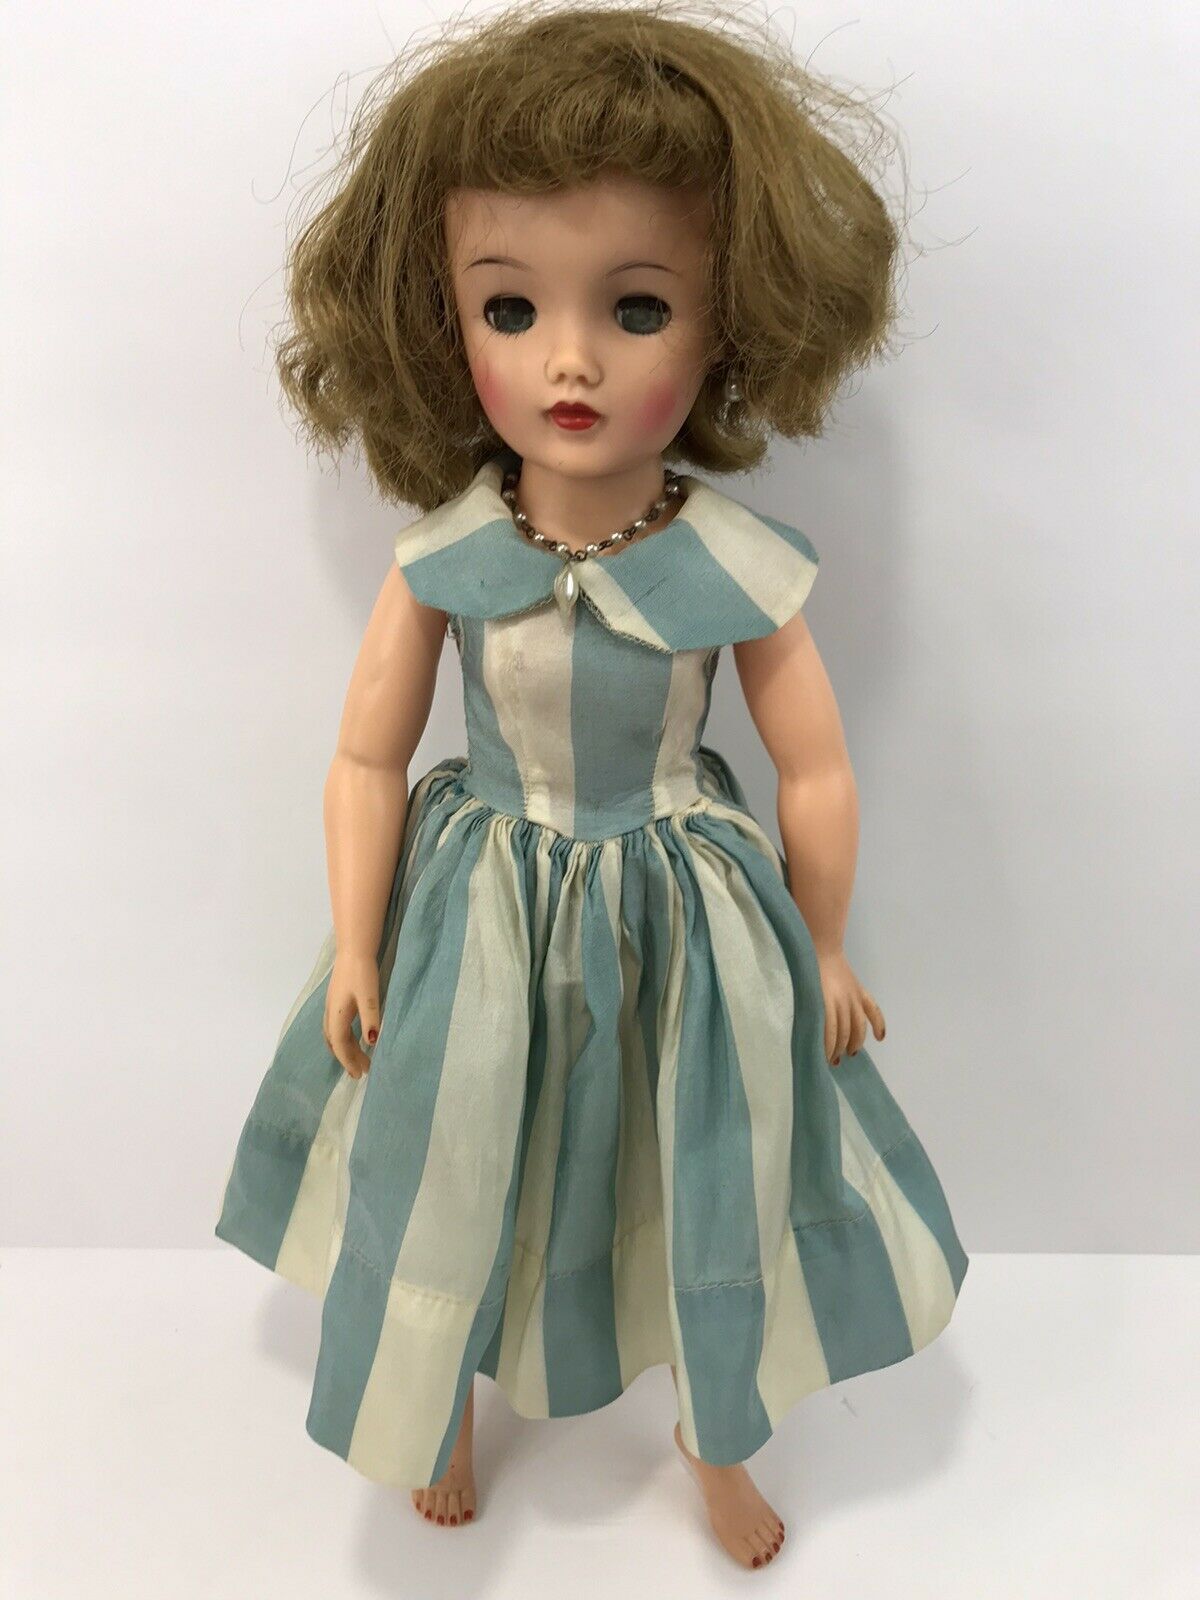 Vintage 1950's Ideal Doll Vt-18 With Jewelry - Miss Revlon ?